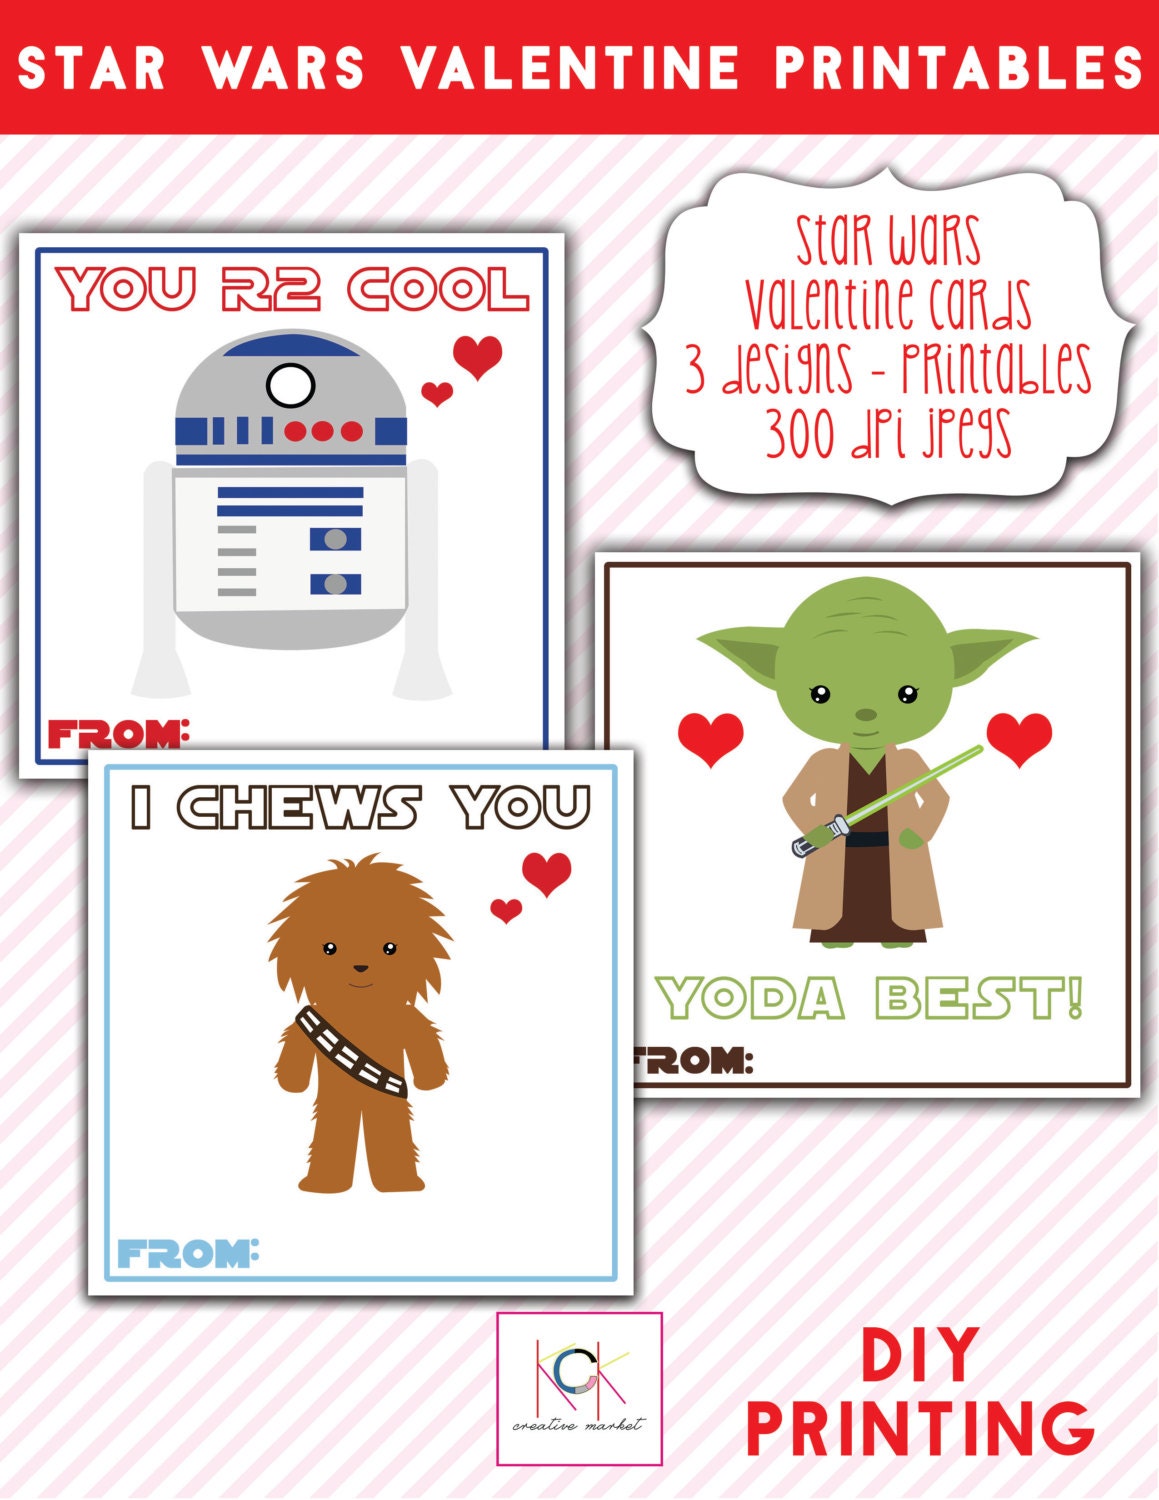 star-wars-printable-valentine-cards-or-tags-4-x-4